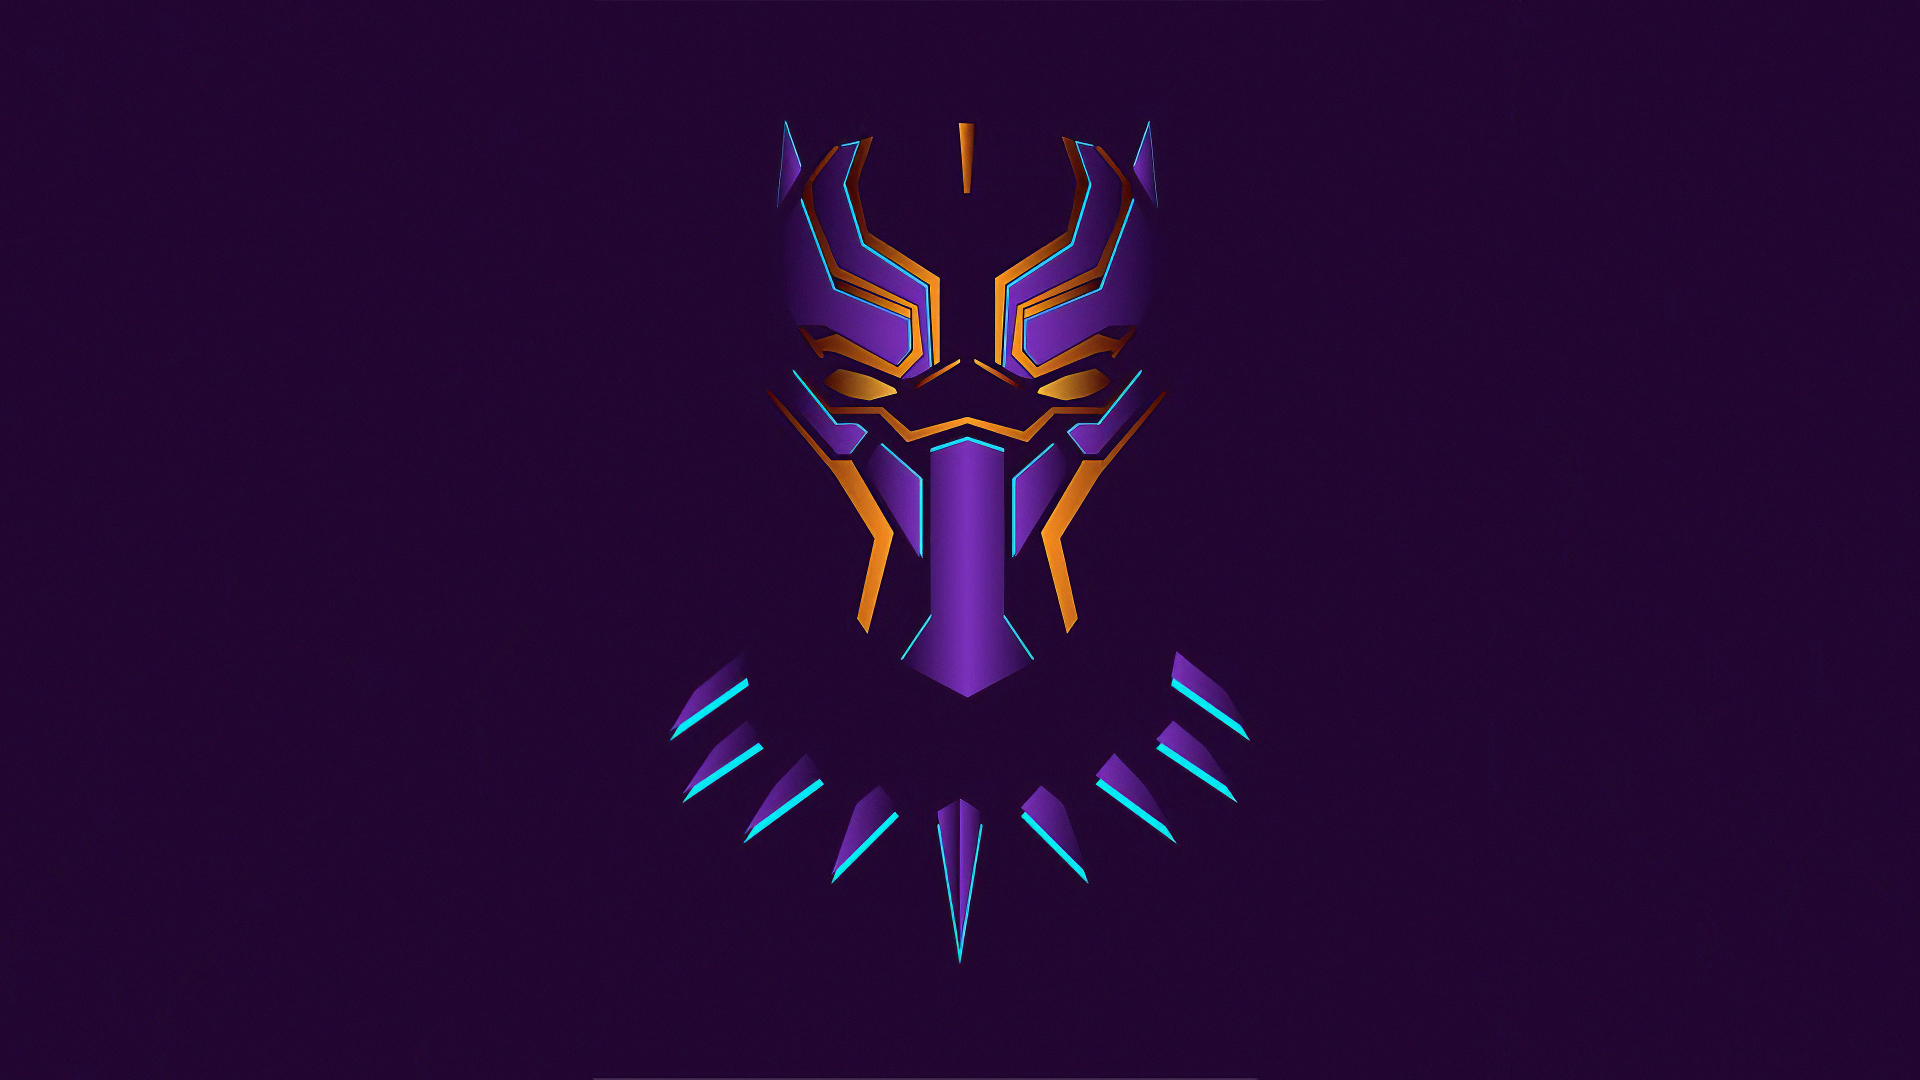 19x1080 New Black Panther Minimalist 1080p Laptop Full Hd Wallpaper Hd Minimalist 4k Wallpapers Images Photos And Background